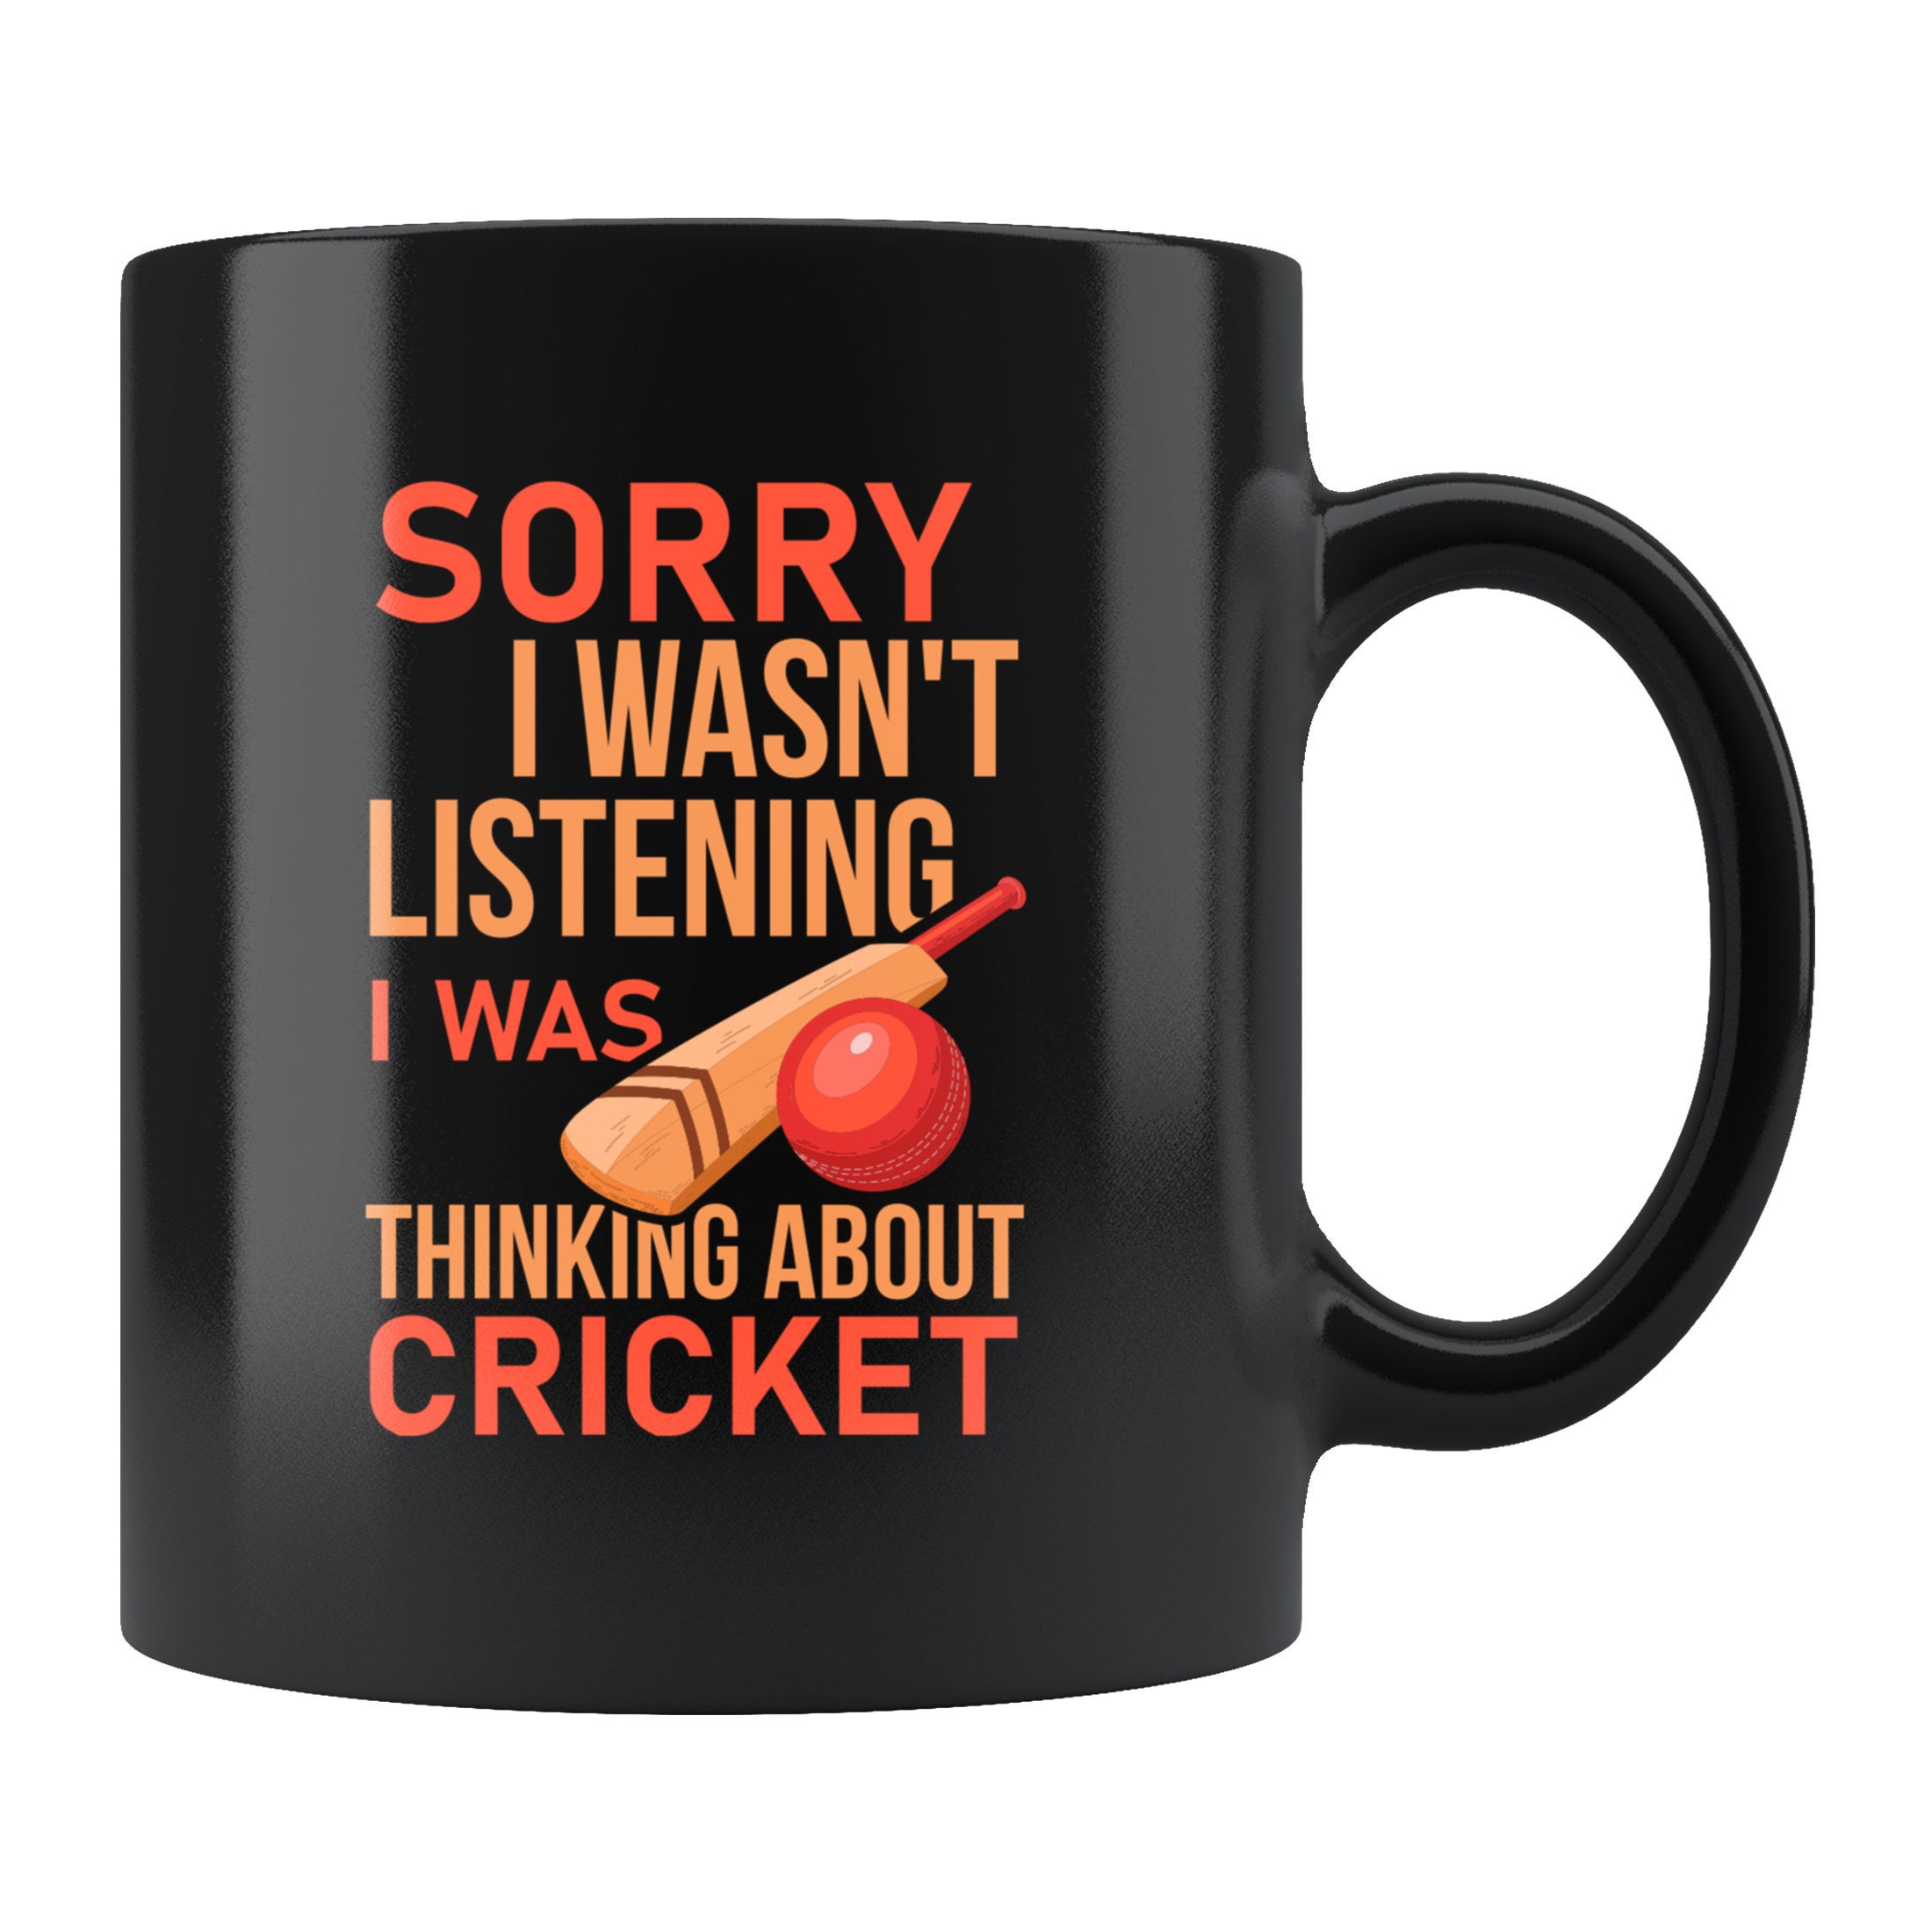 Got Someone in Your Life Who Eats, Breathes & Lives the Game of Cricket?  Here are 12 Unusual Gifts for Cricket Fans Which are Just Perfect for That  Friend of Yours! (2020)